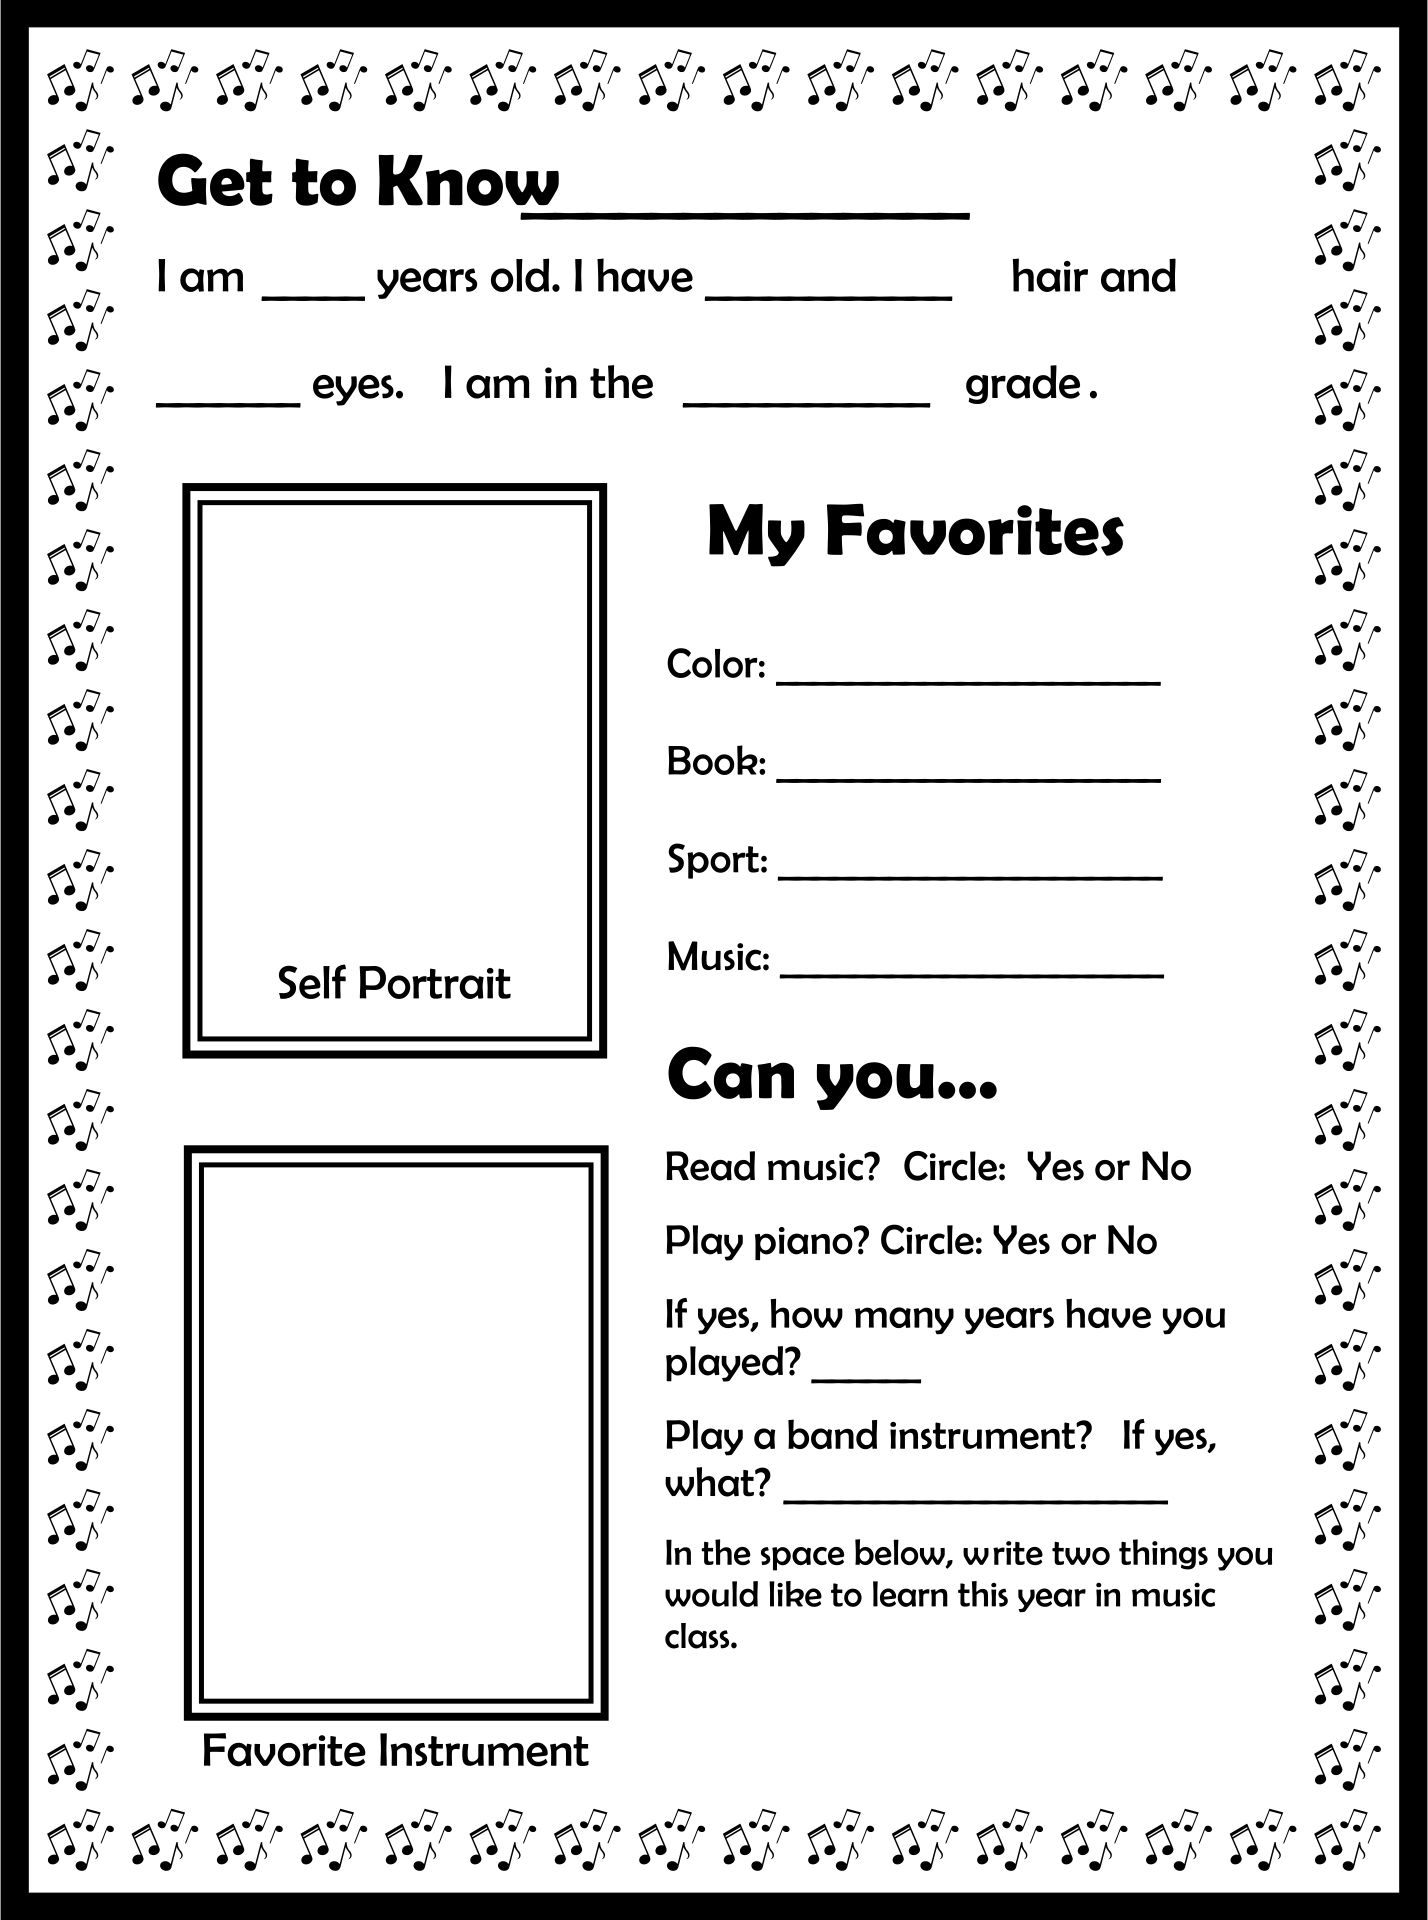 Get To Know You In Music Class Worksheet By Melody Room